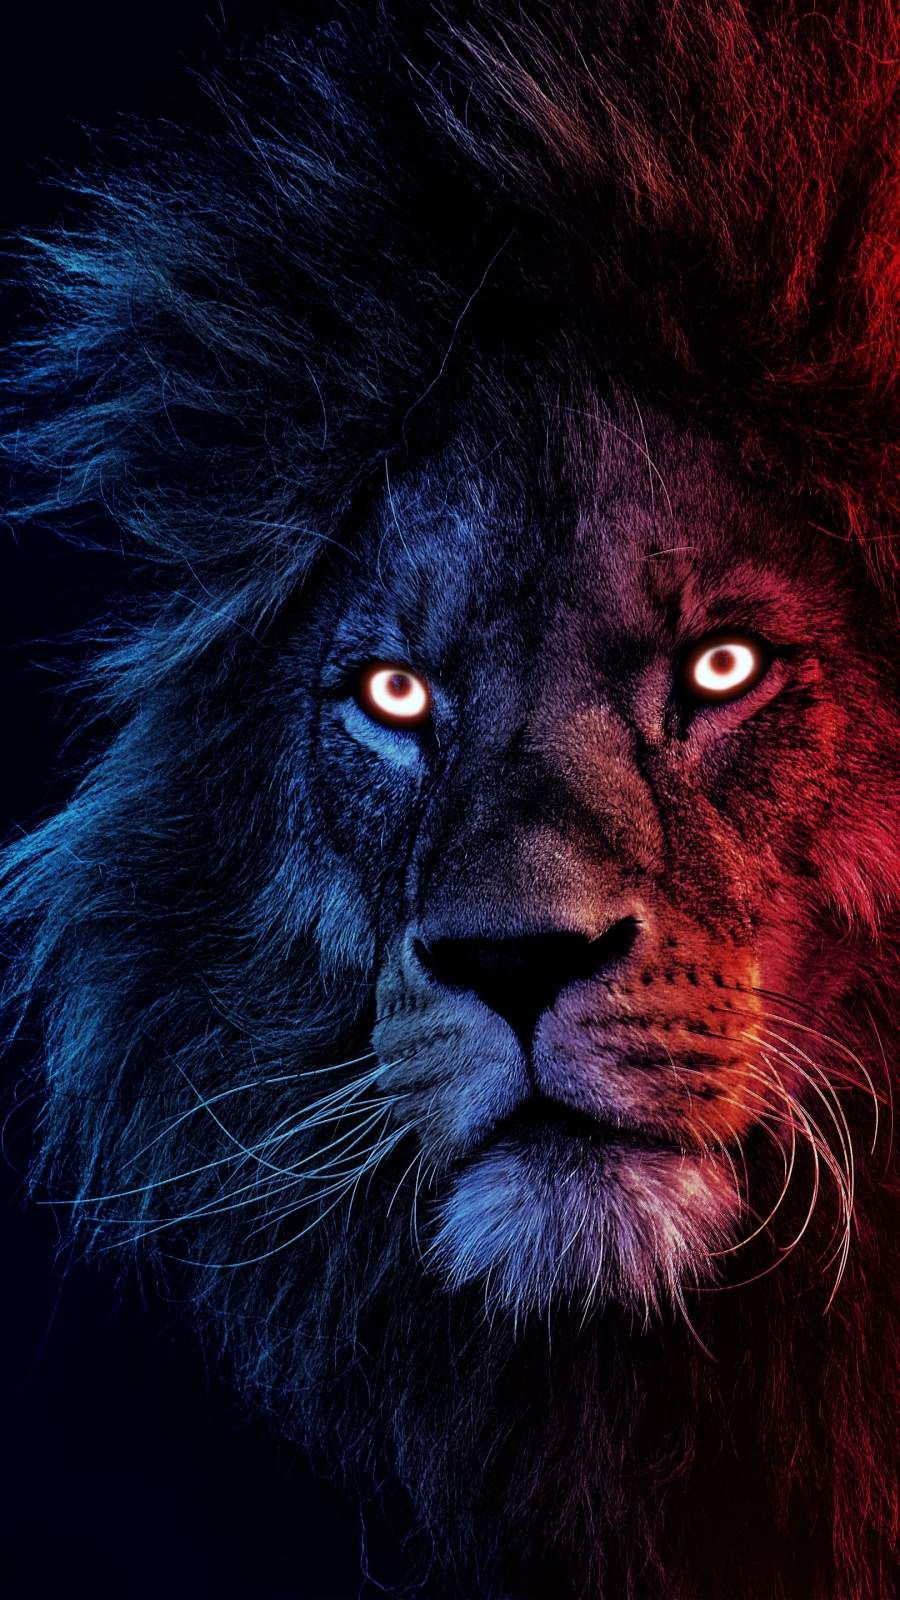 iPhone Wallpaper for iPhone iPhone 11 and iPhone X, iPhone Wallpaper. Lion wallpaper, Lion image, Lion wallpaper iphone